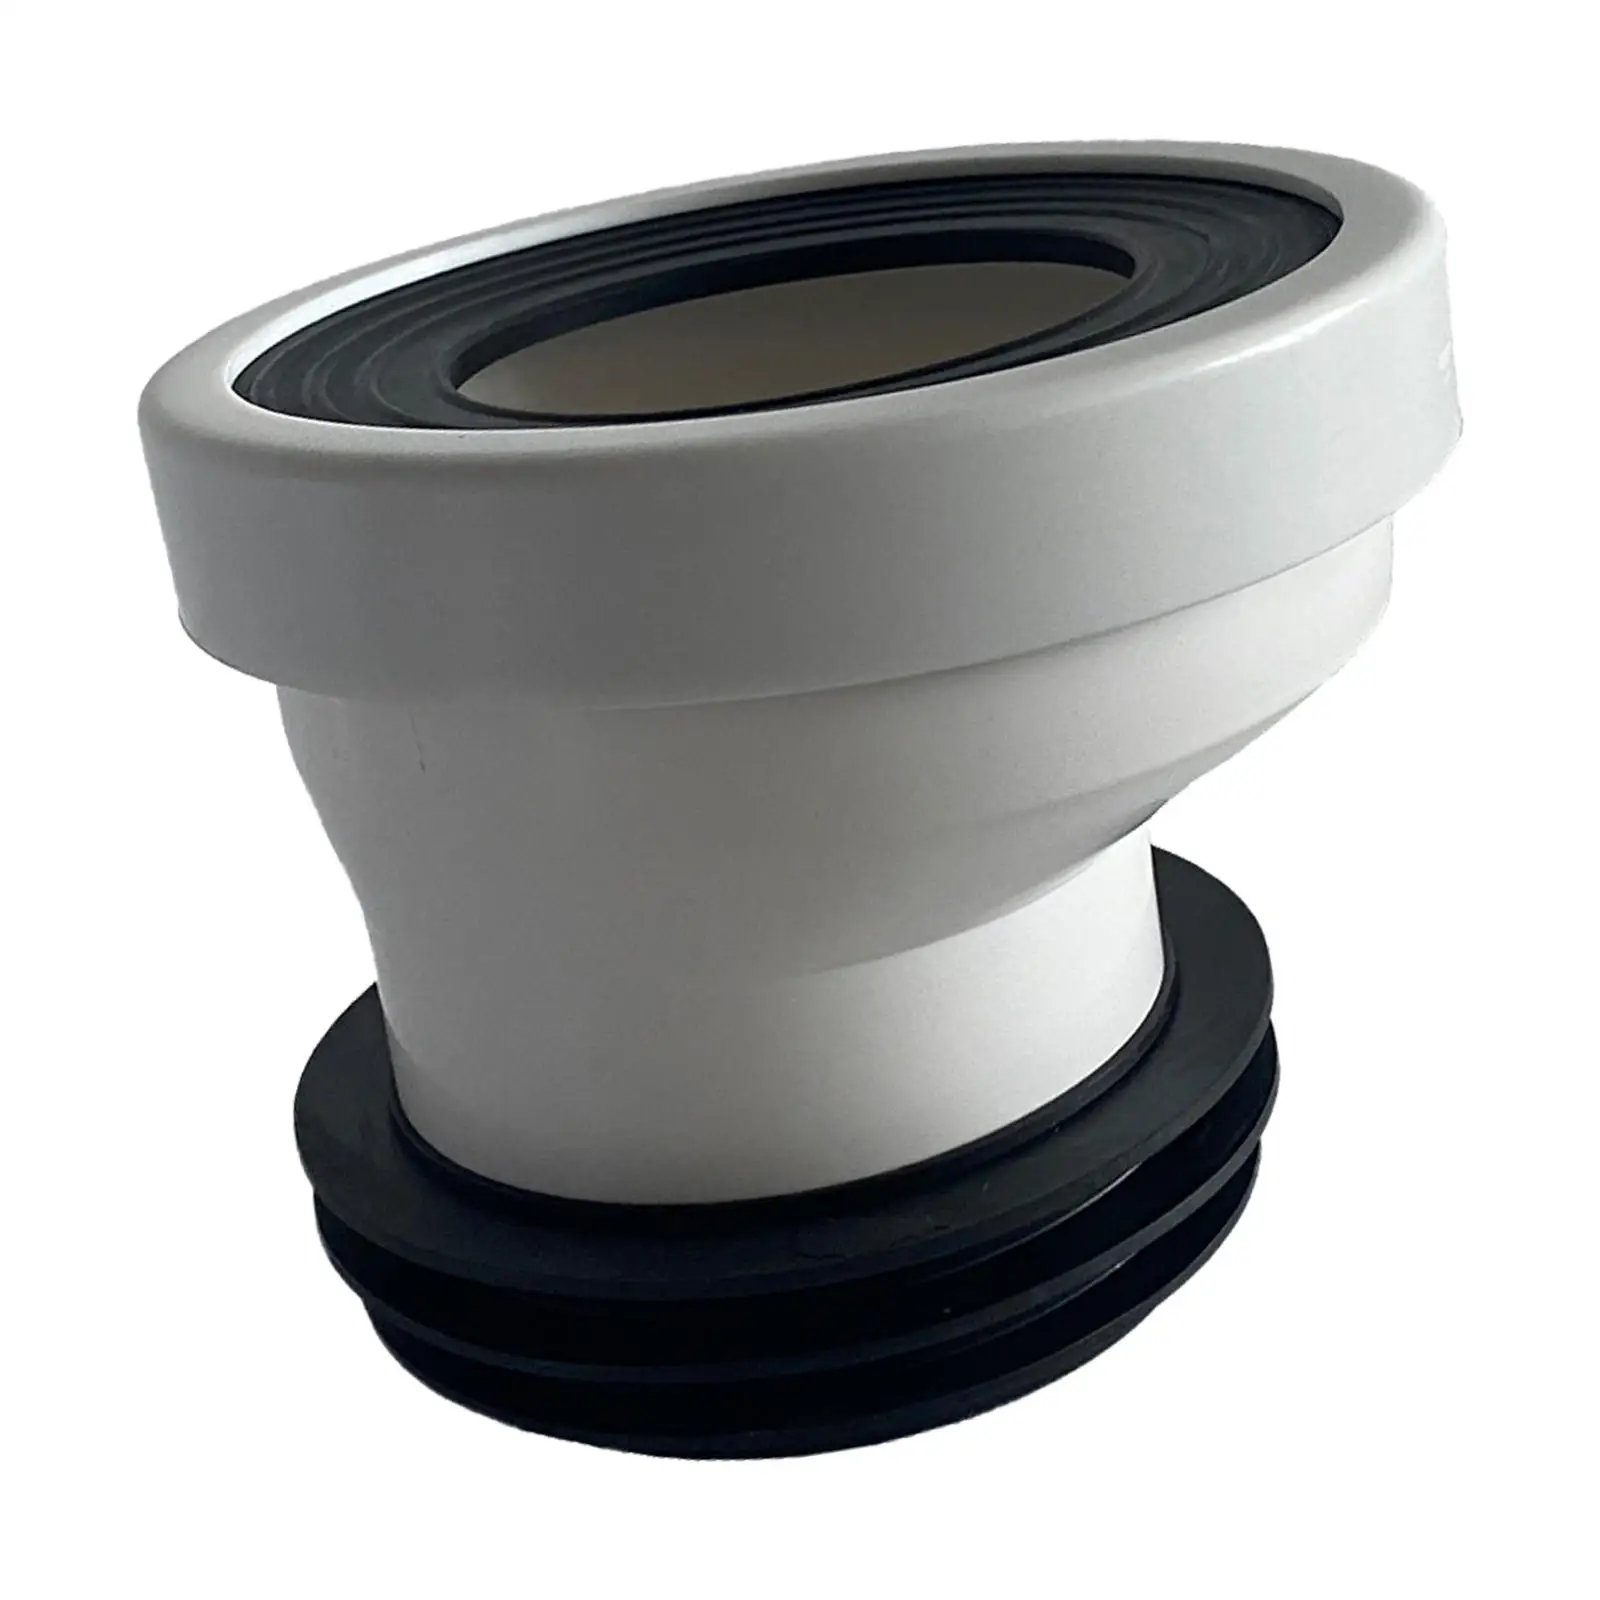 Full Flush Offset Toilet Flange Connector Replacement PVC Toilet Flange Shifter for Plumbing Drainage Systems Repairing Urinals